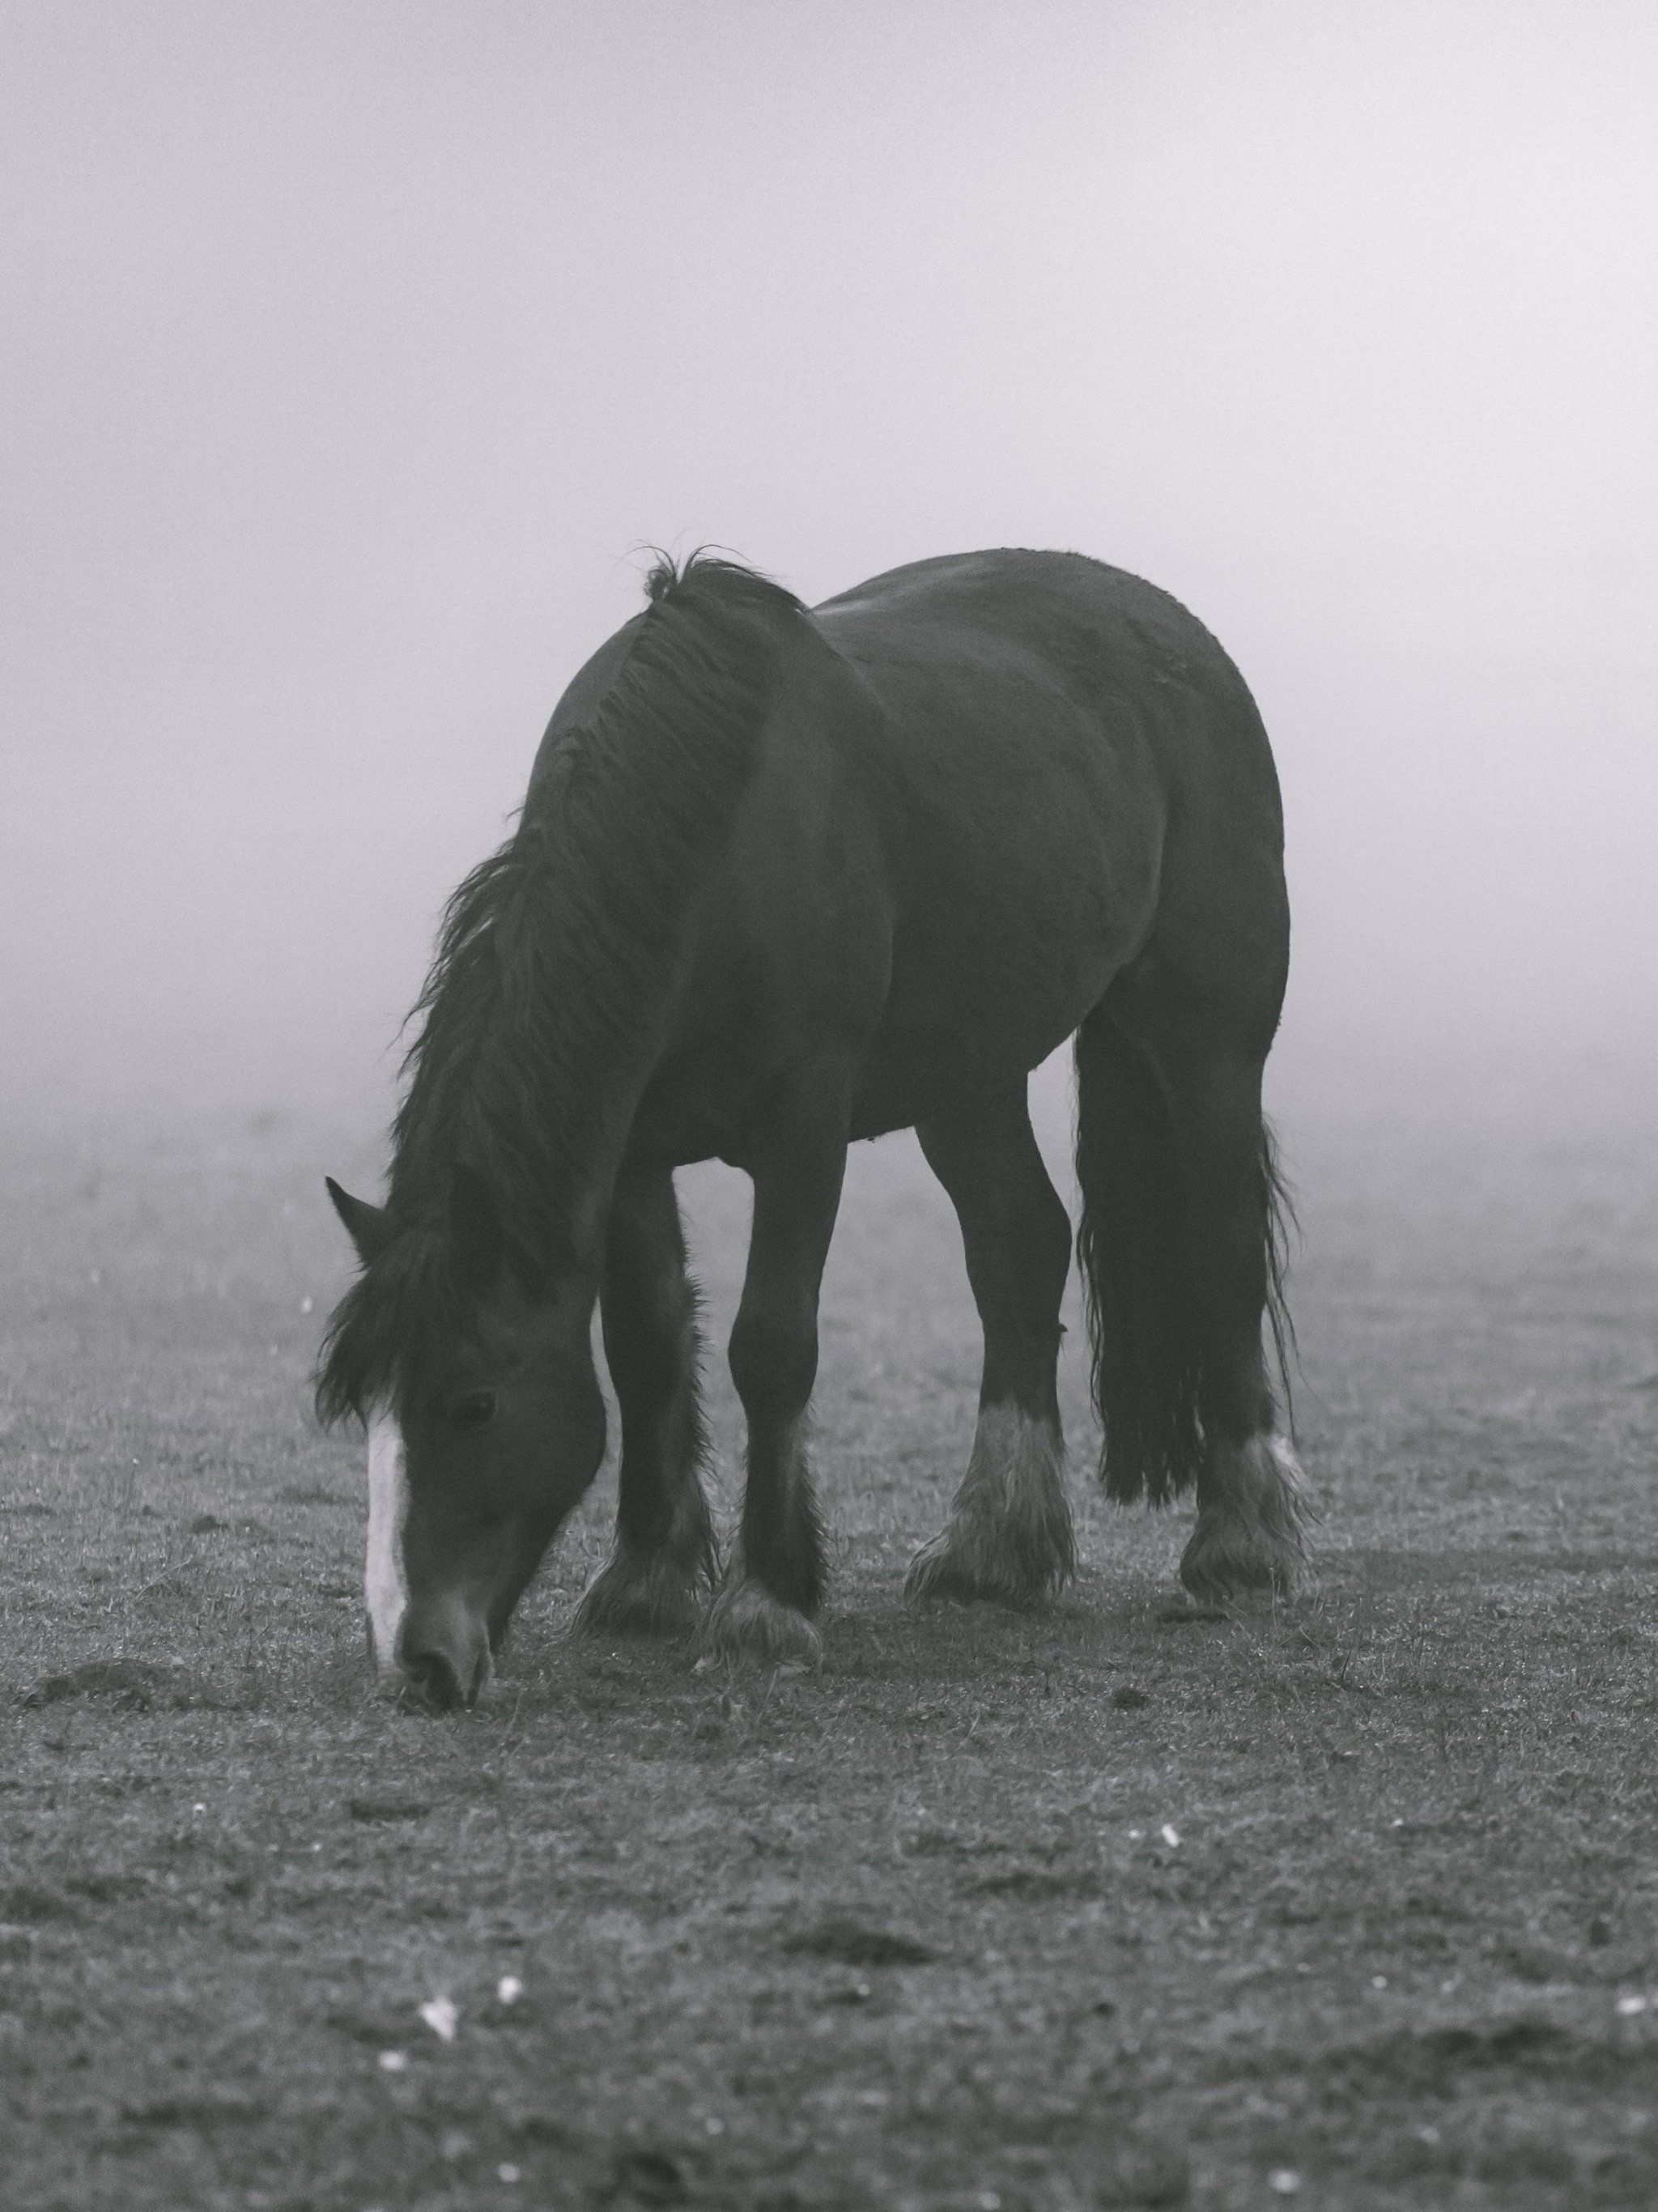 A horse is grazing in the fog - Fog